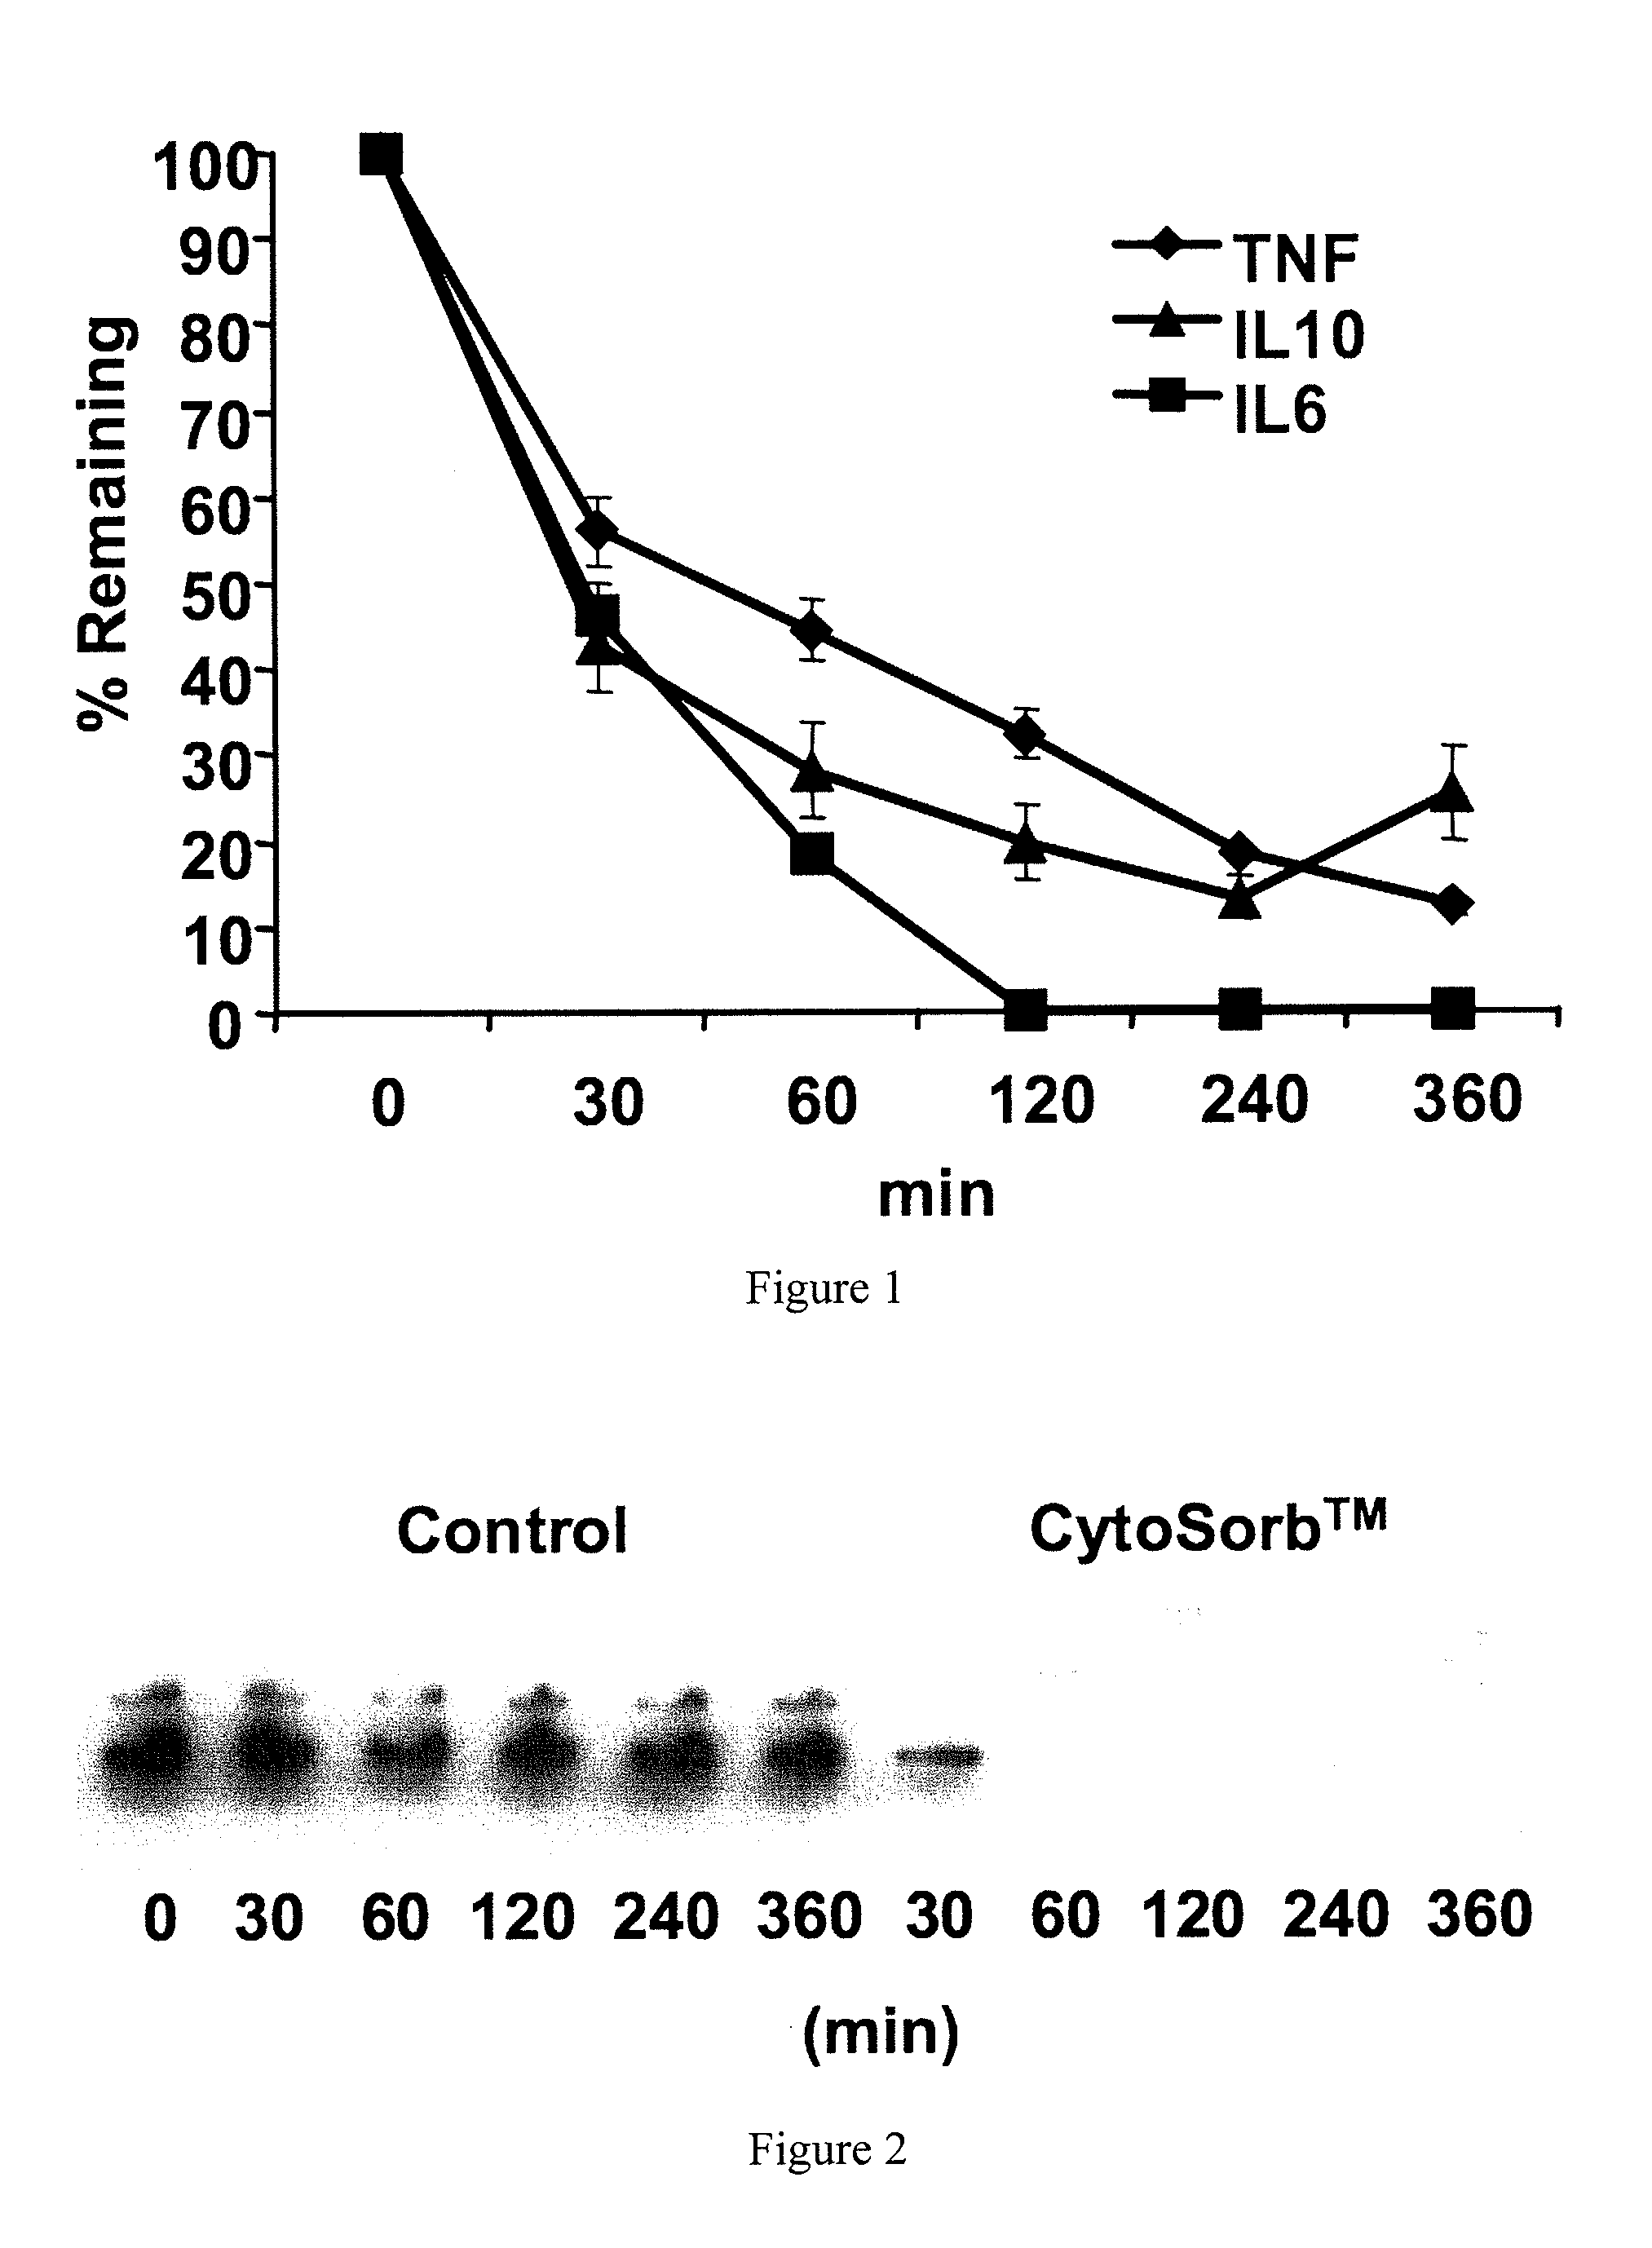 Administration of an adsorbent polymer for treatment of systemic inflammation